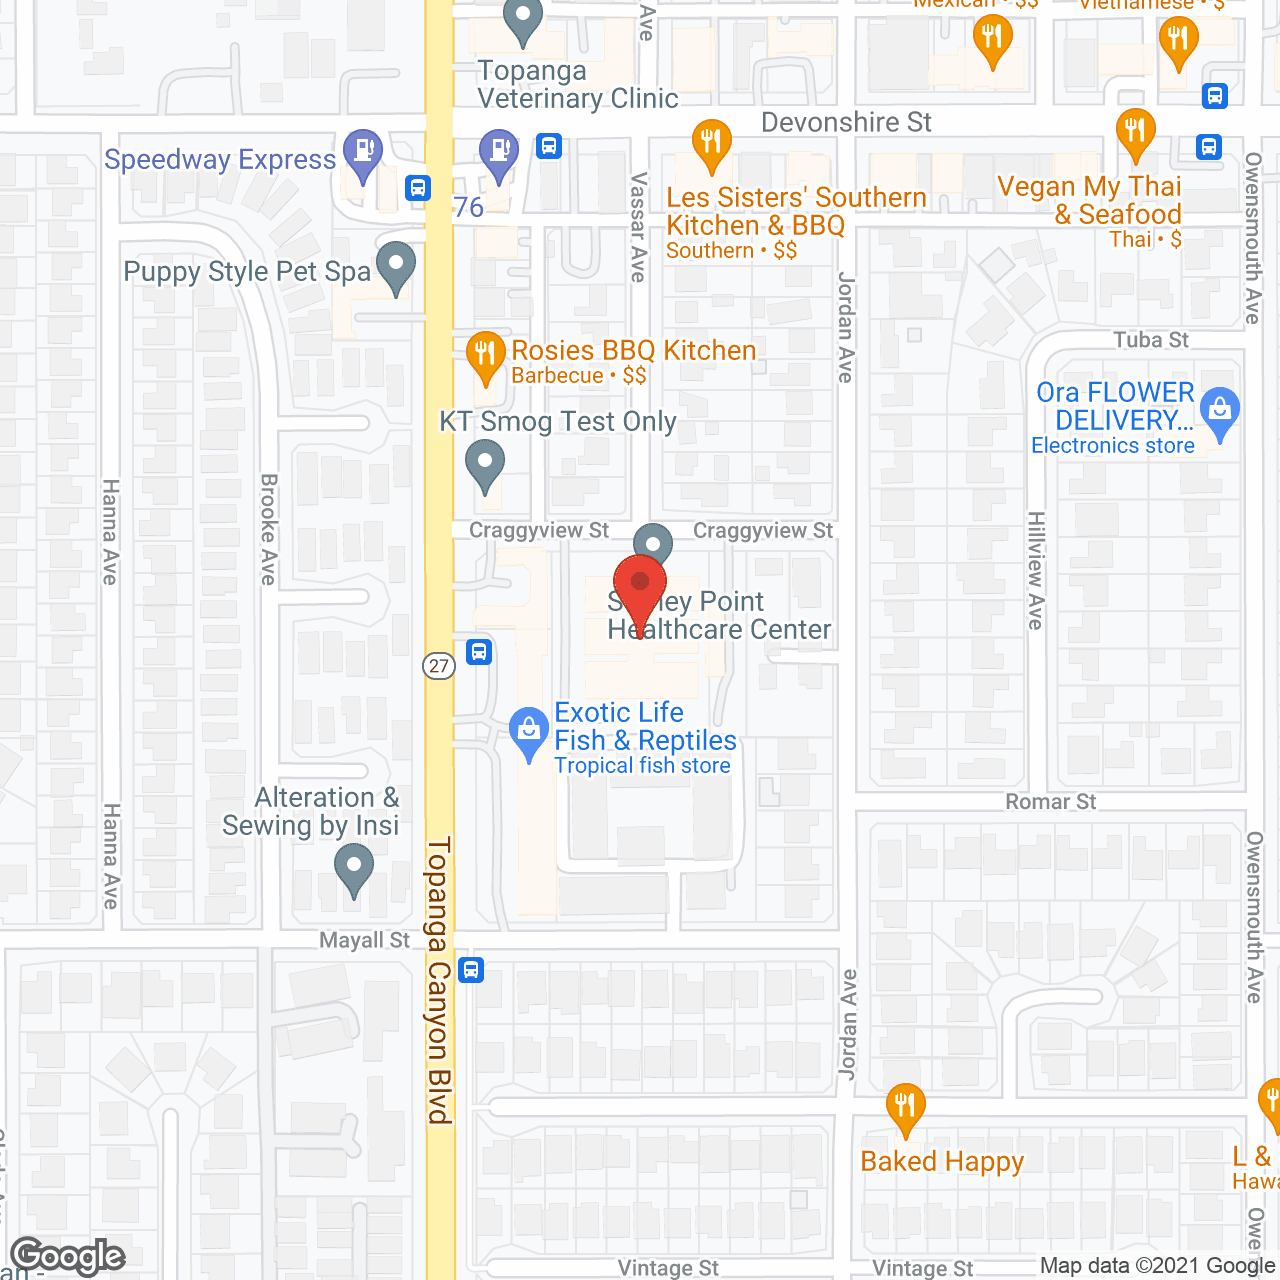 Gold Star Health Care Center in google map